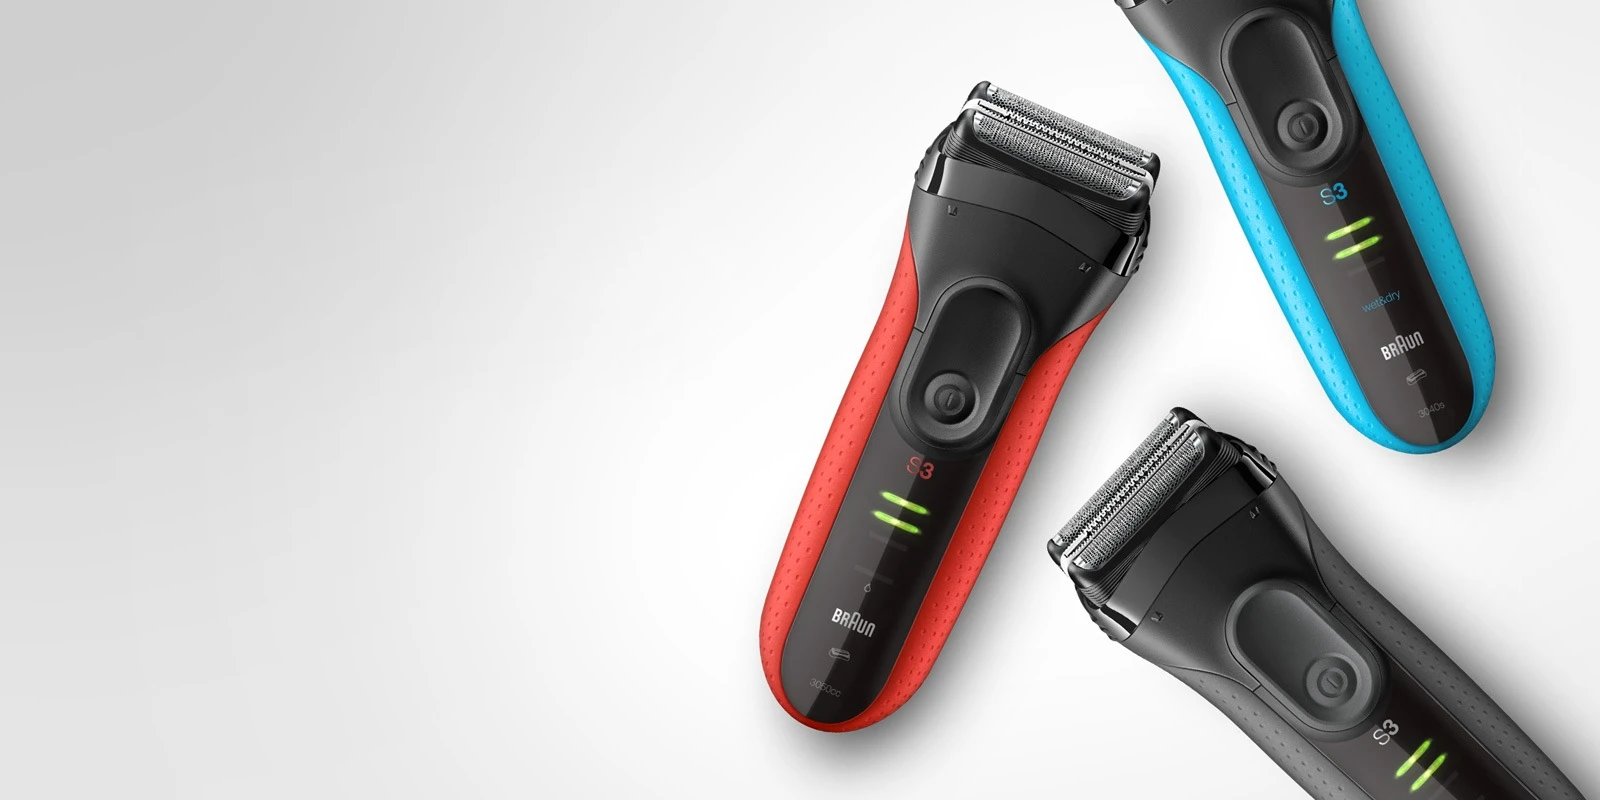 Braun S3 ProSkin   With 3-Flex head and MicroComb for faster shaving with great skin comfort.¹